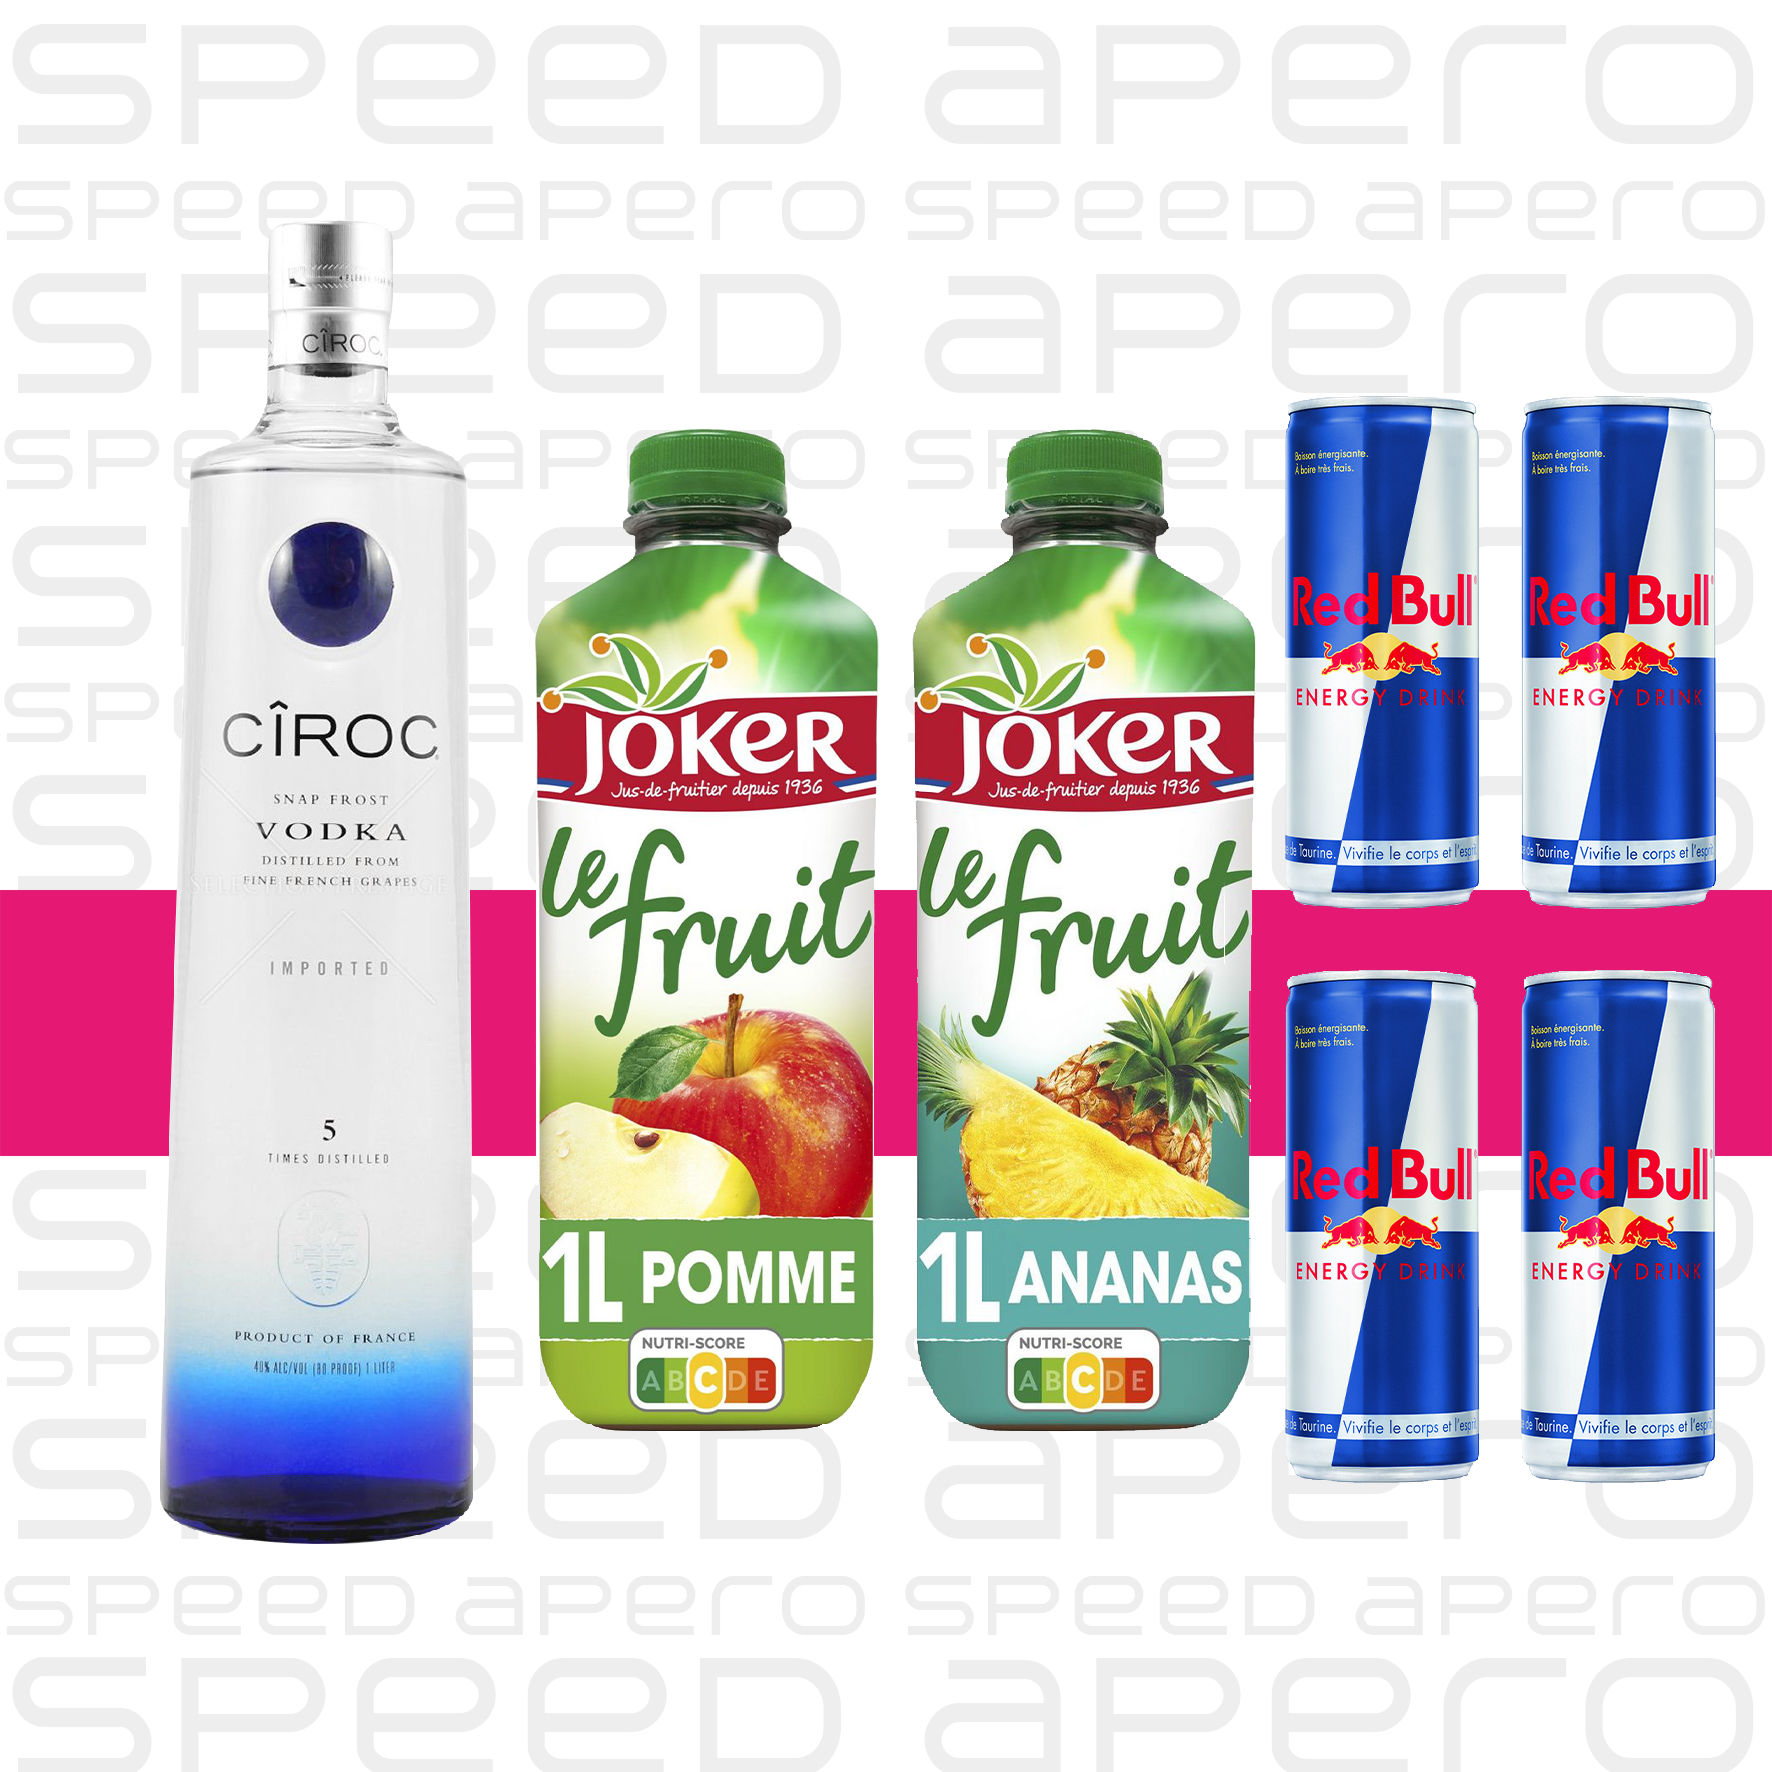 Ciroc_1-Pomme-1-Ananas-4-Red-Bull.png